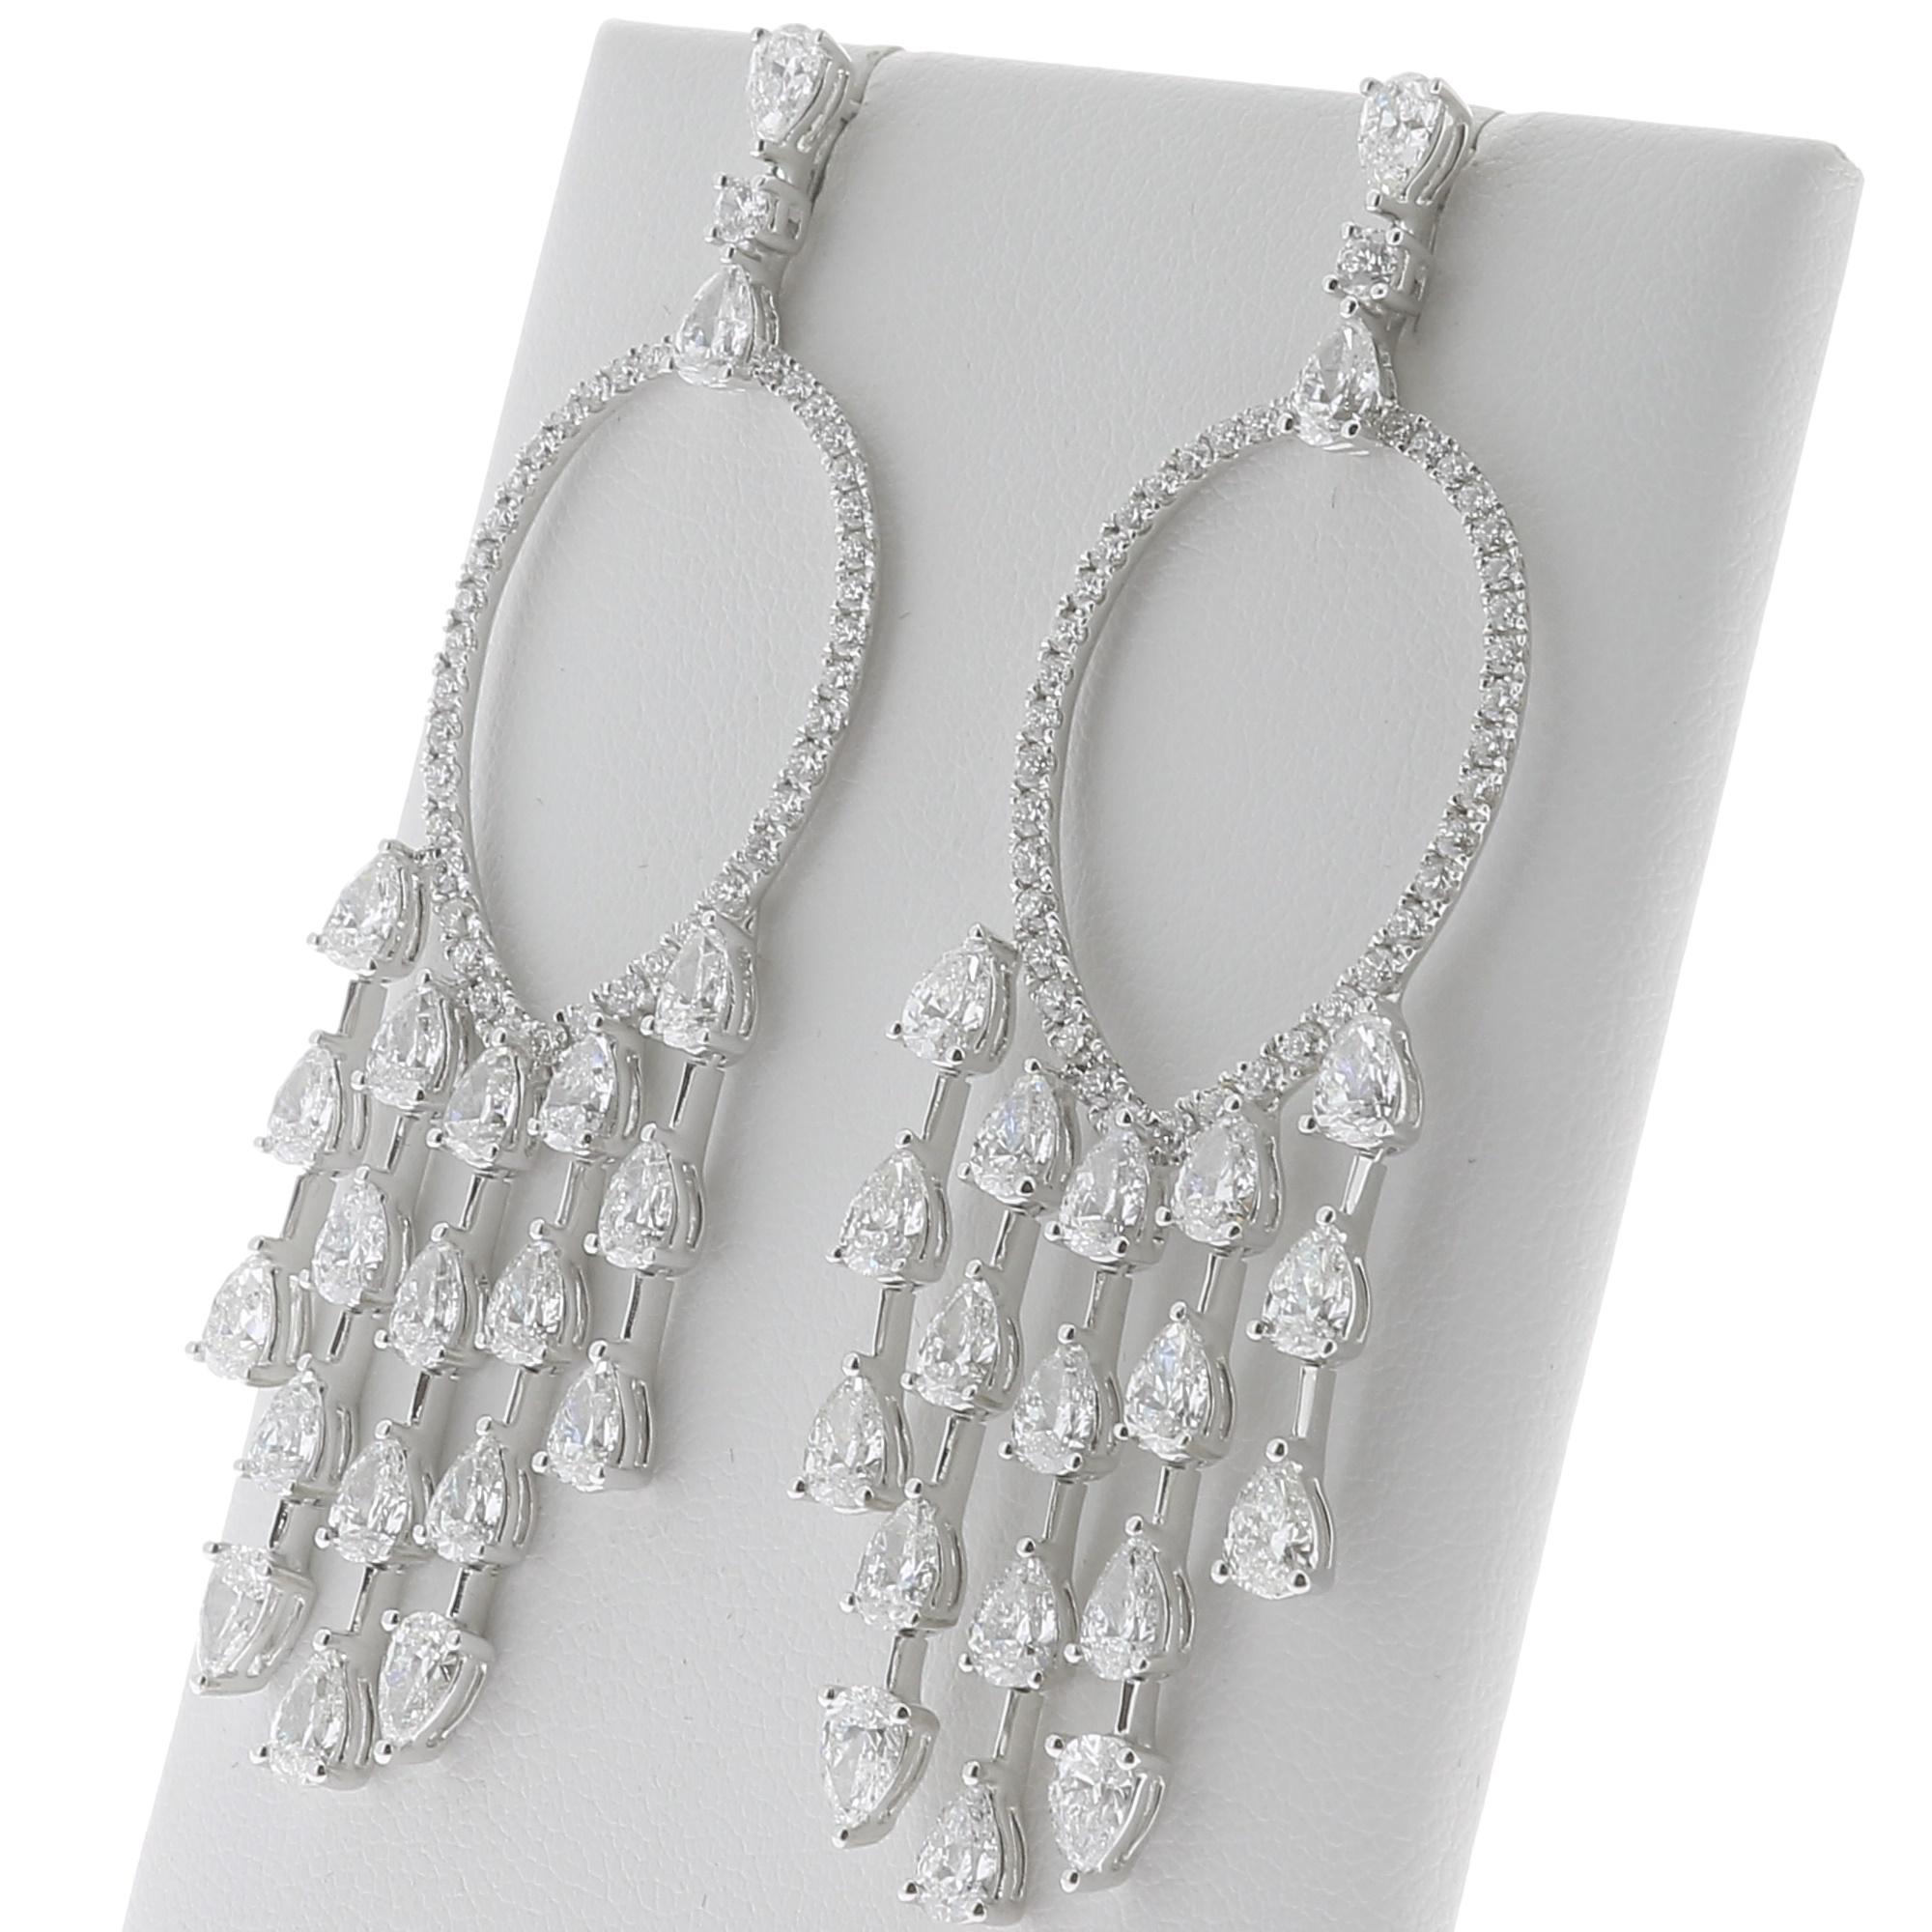 Discover our elegant Diamond Dream Catcher Drop Earrings.
The Diamond Earrings are set with 40 Pear Diamonds and 82 Round Diamonds.
The total pear diamond weight is 7.53 Carats, and the total Round Diamond weight is 1.21 carats.
Totally these